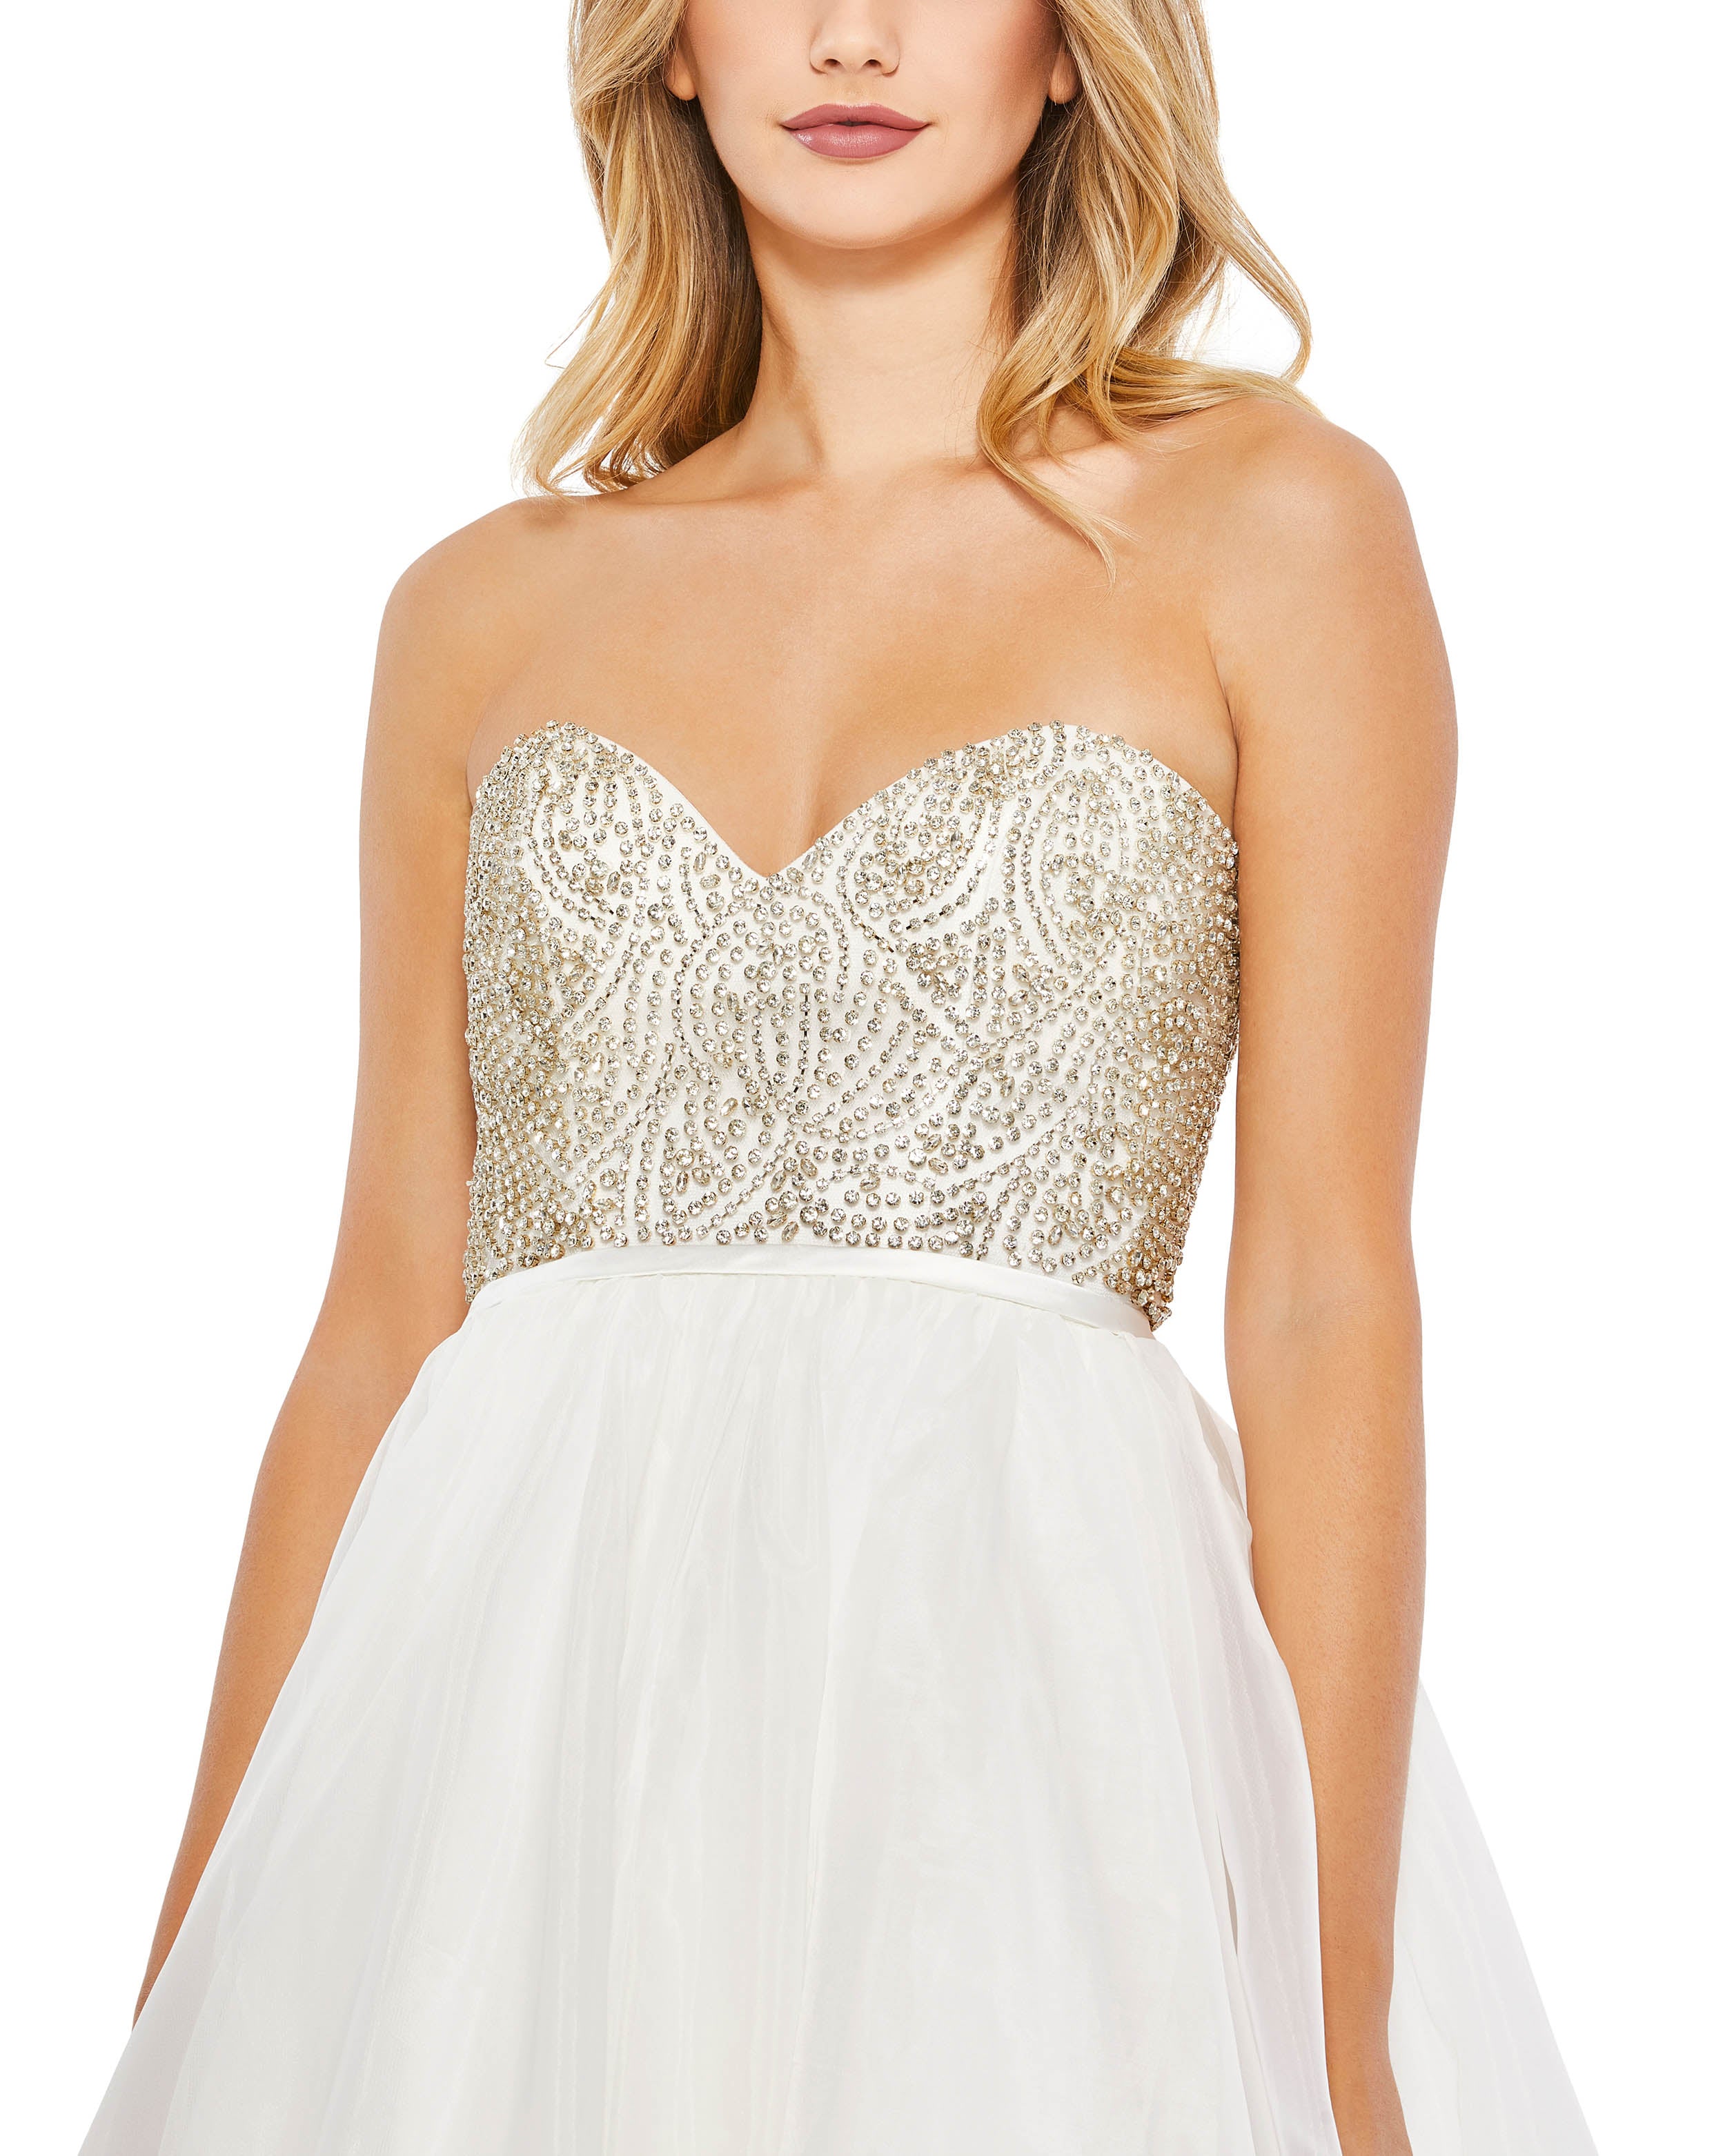 Strapless Embellished Ball Gown